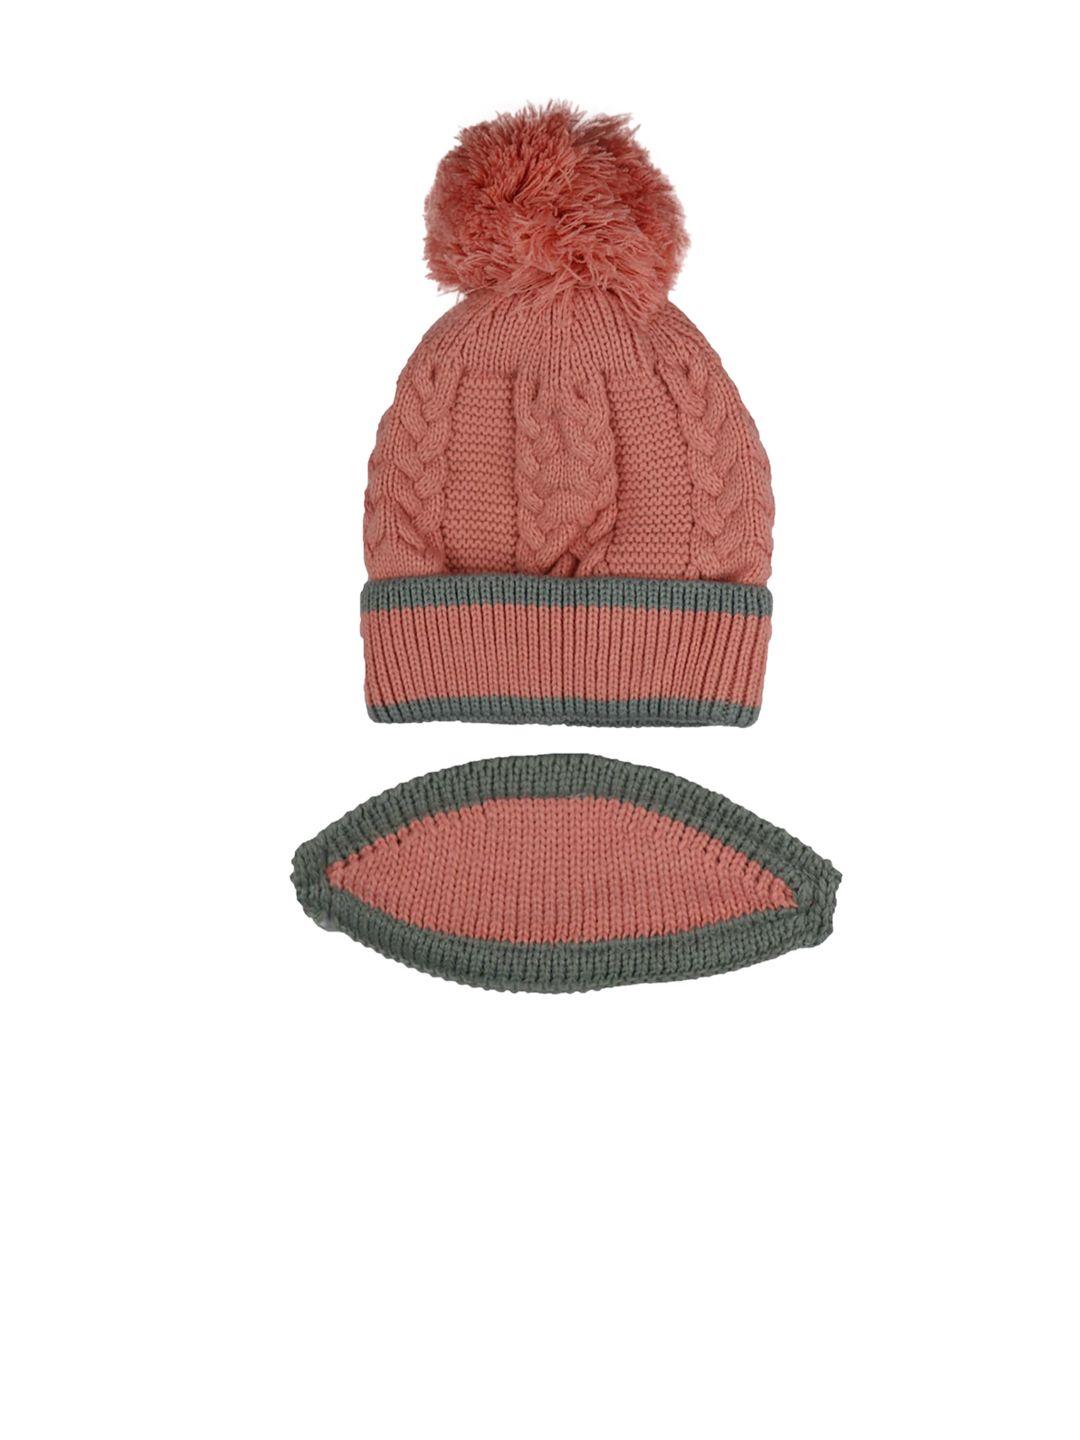 isweven-unisex-pink-self-design-woven-expandable-beanie